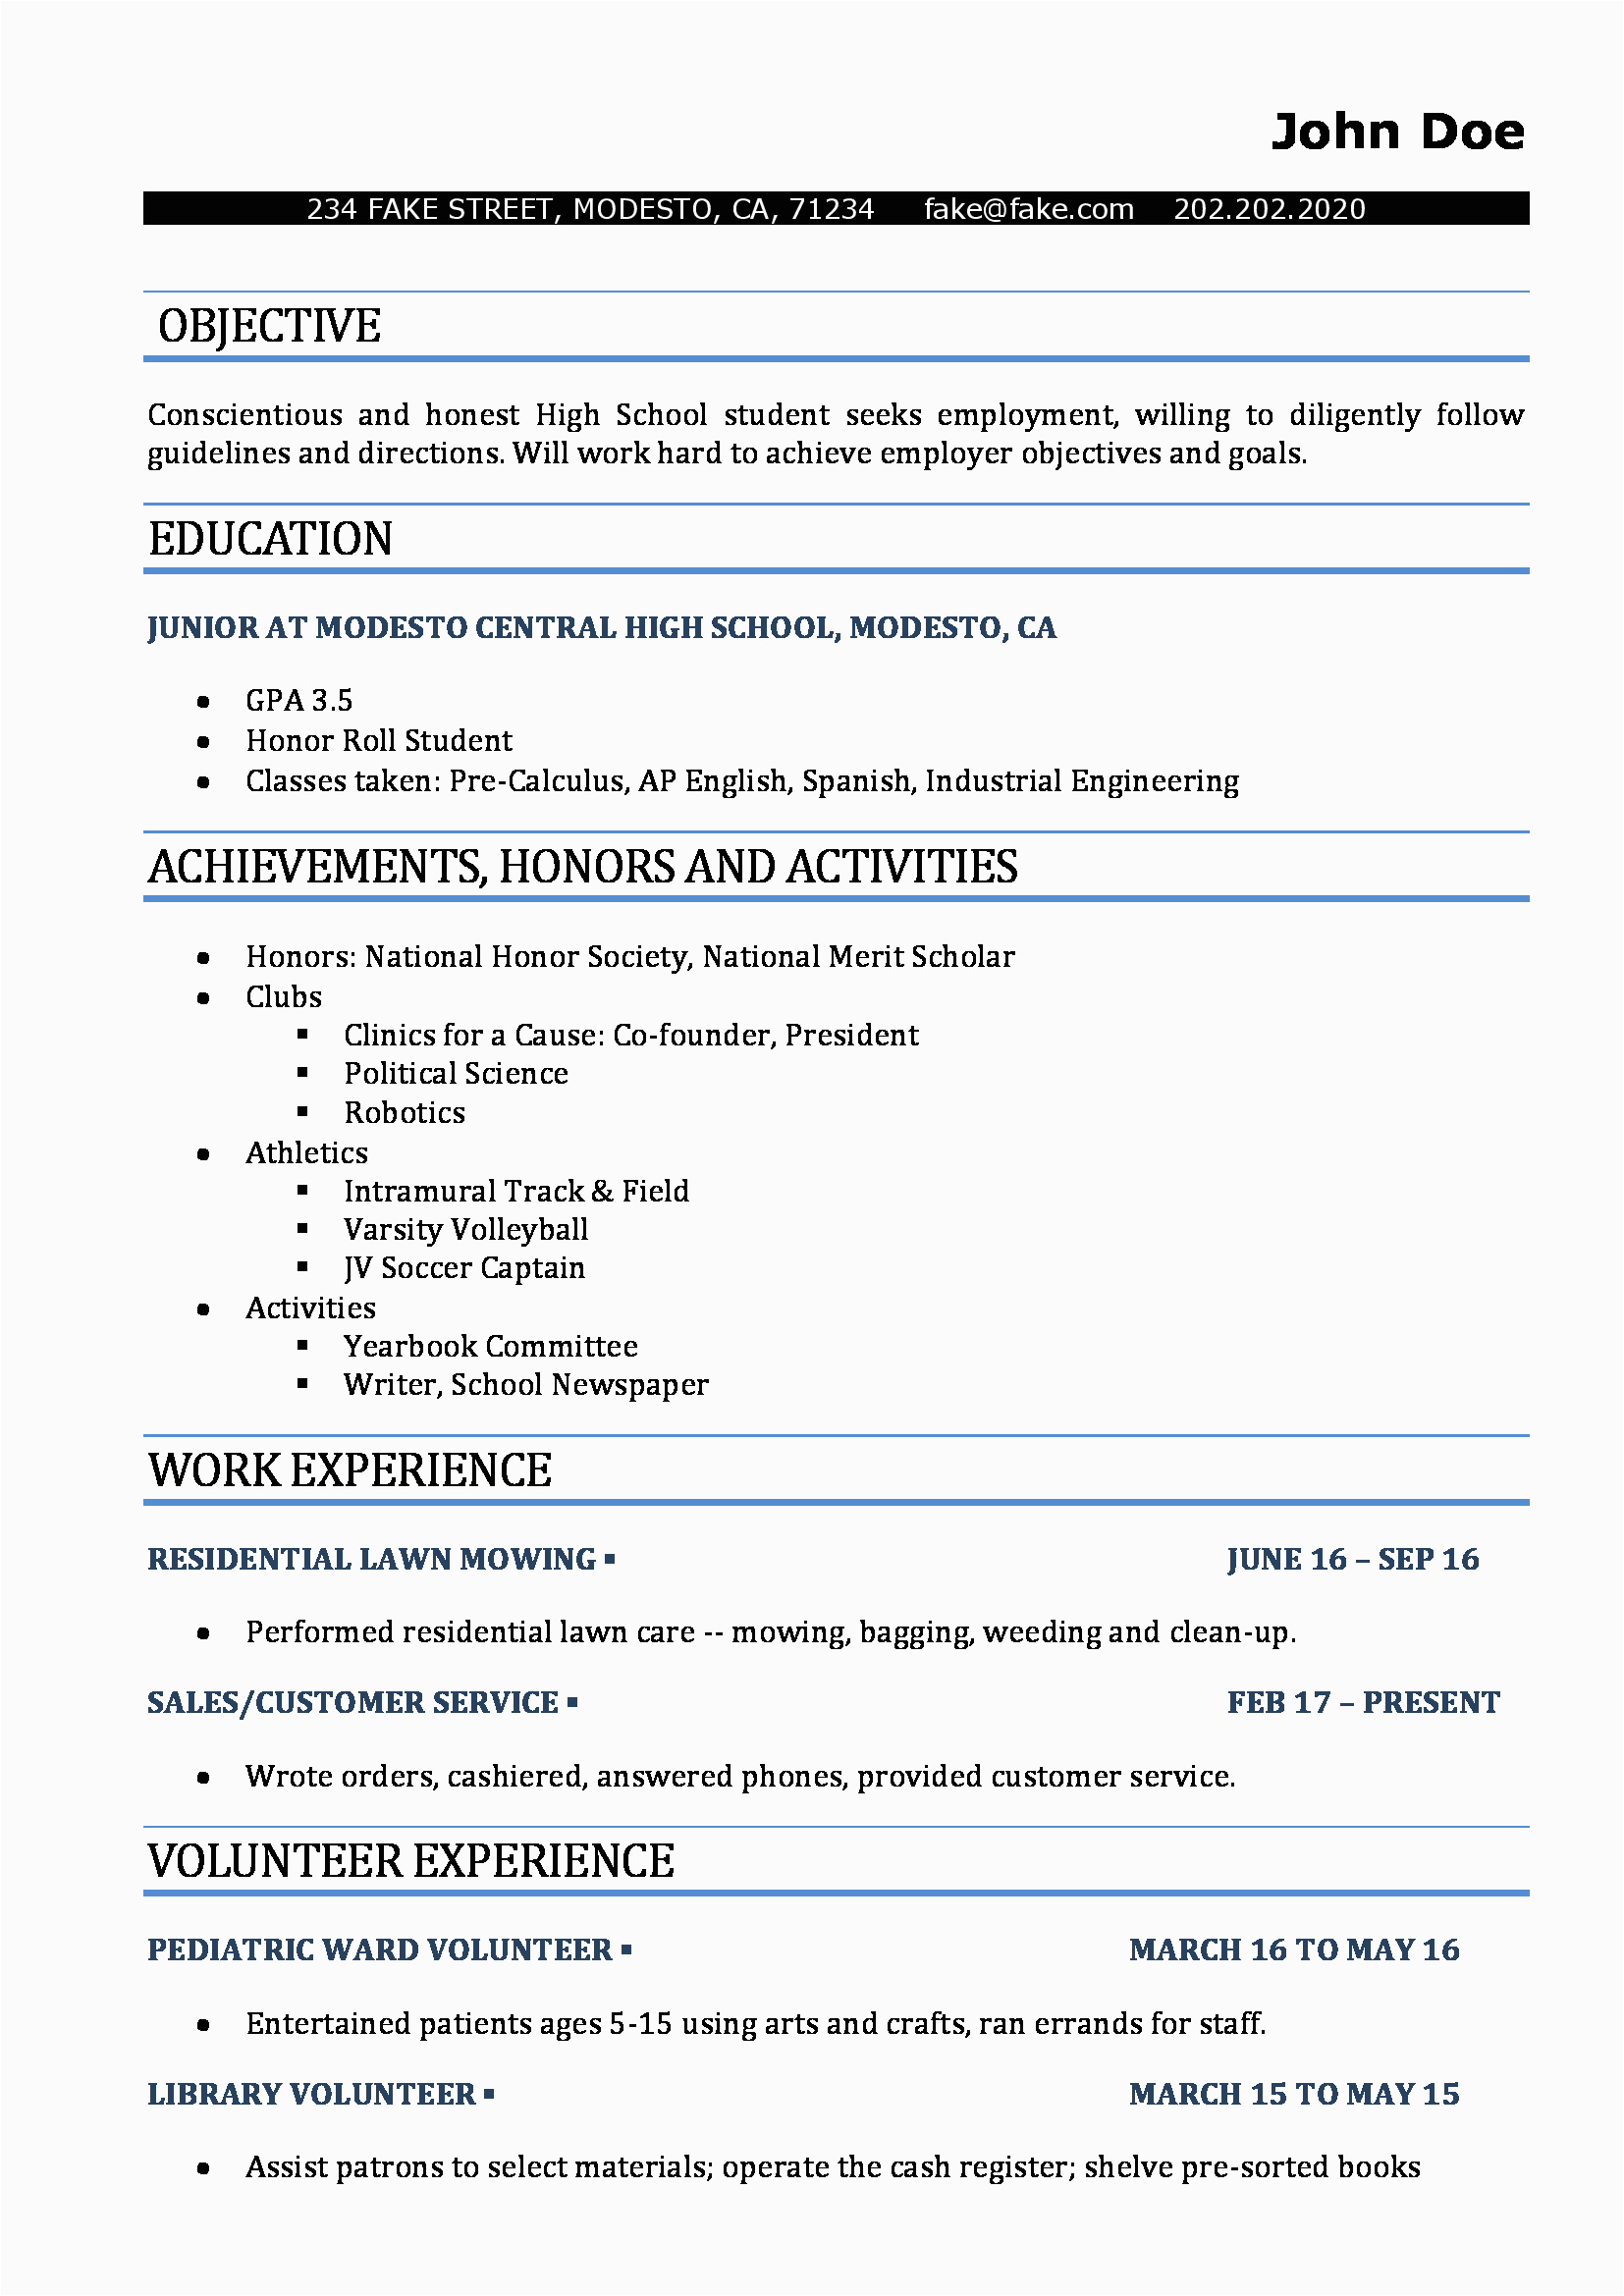 Samples Of High School Resumes for College Sample High School Resume for College Good Resume Examples